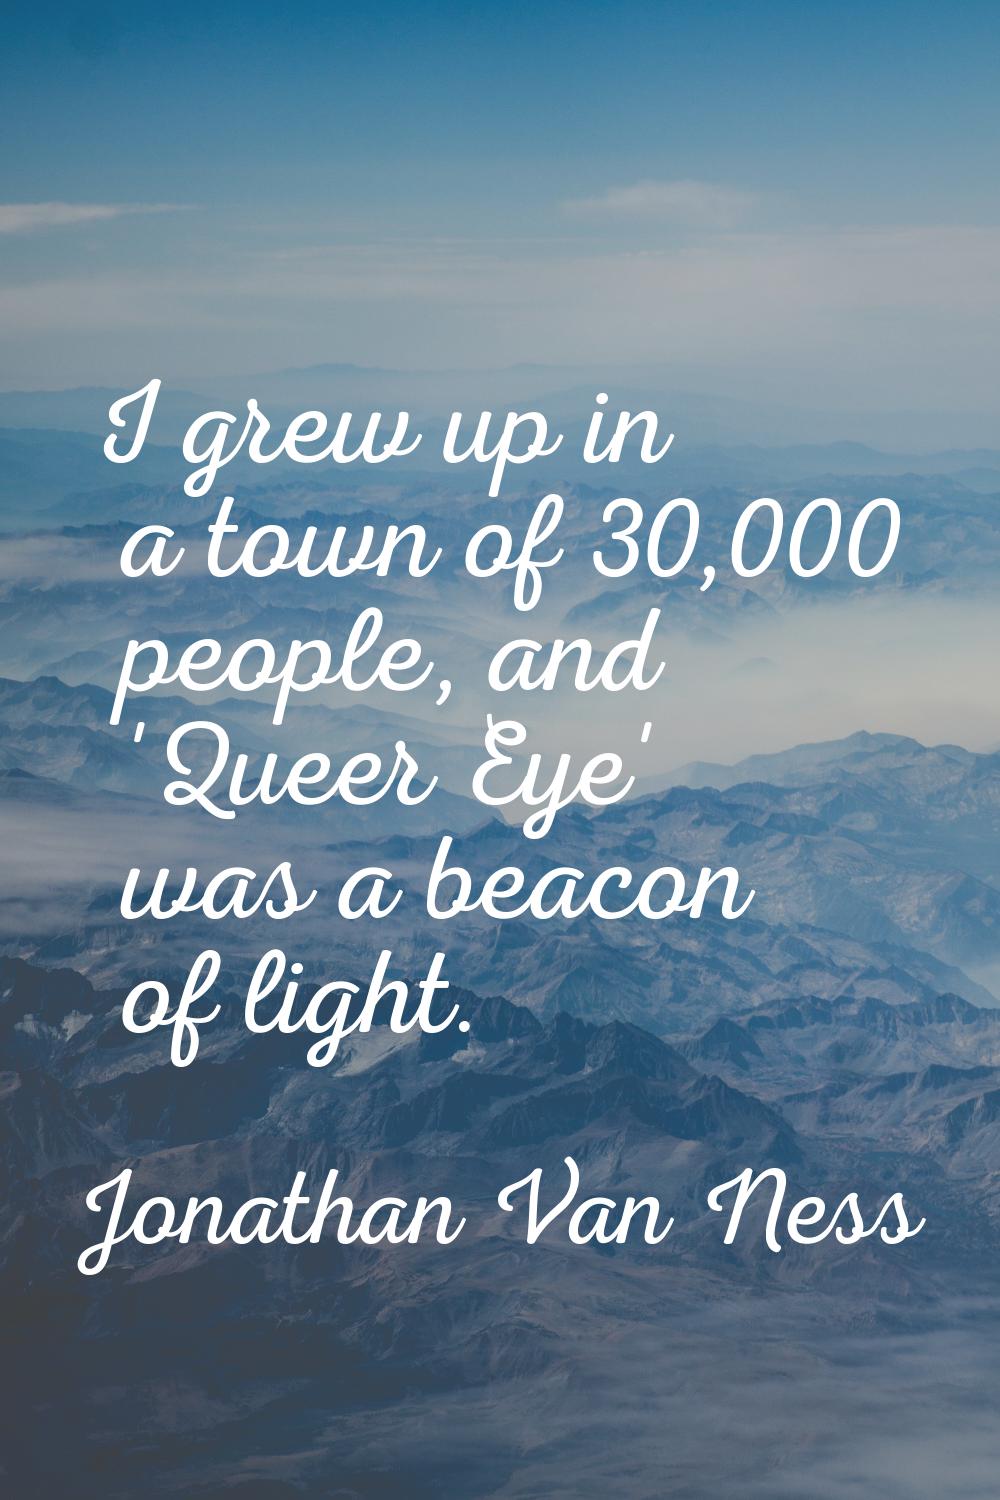 I grew up in a town of 30,000 people, and 'Queer Eye' was a beacon of light.